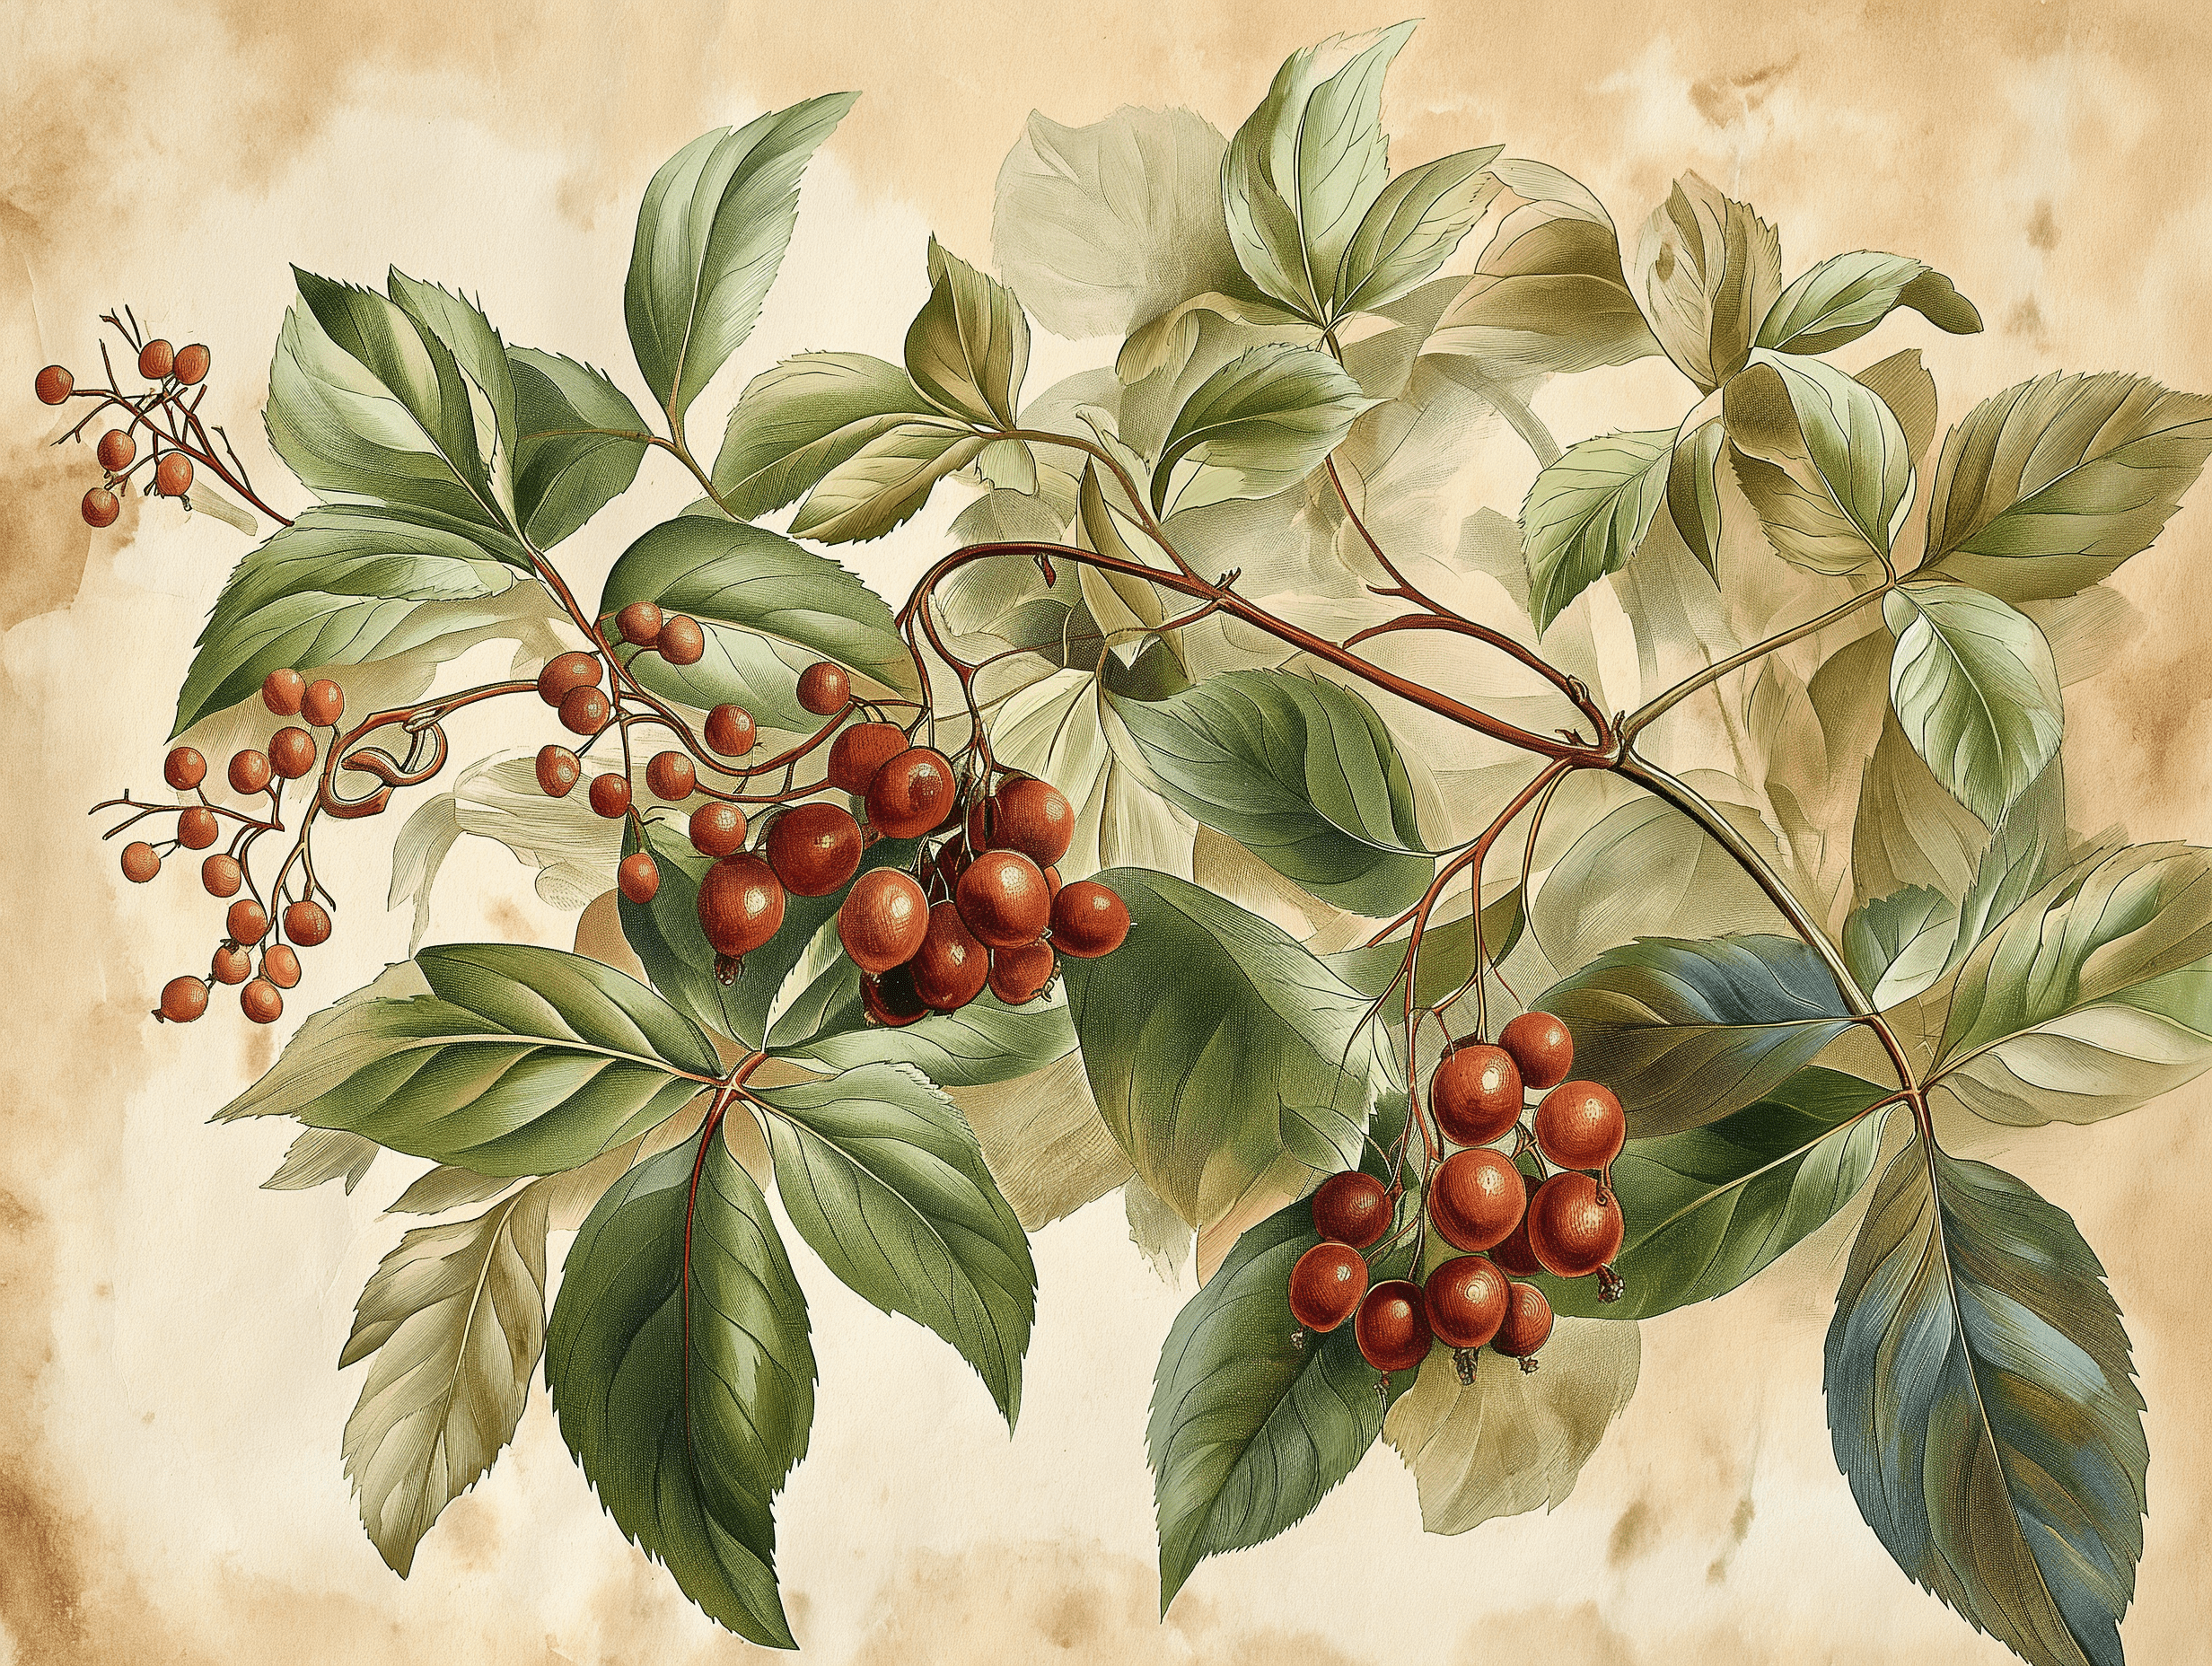 An ancient botanical illustration depicting a simple vine with leaves and berries